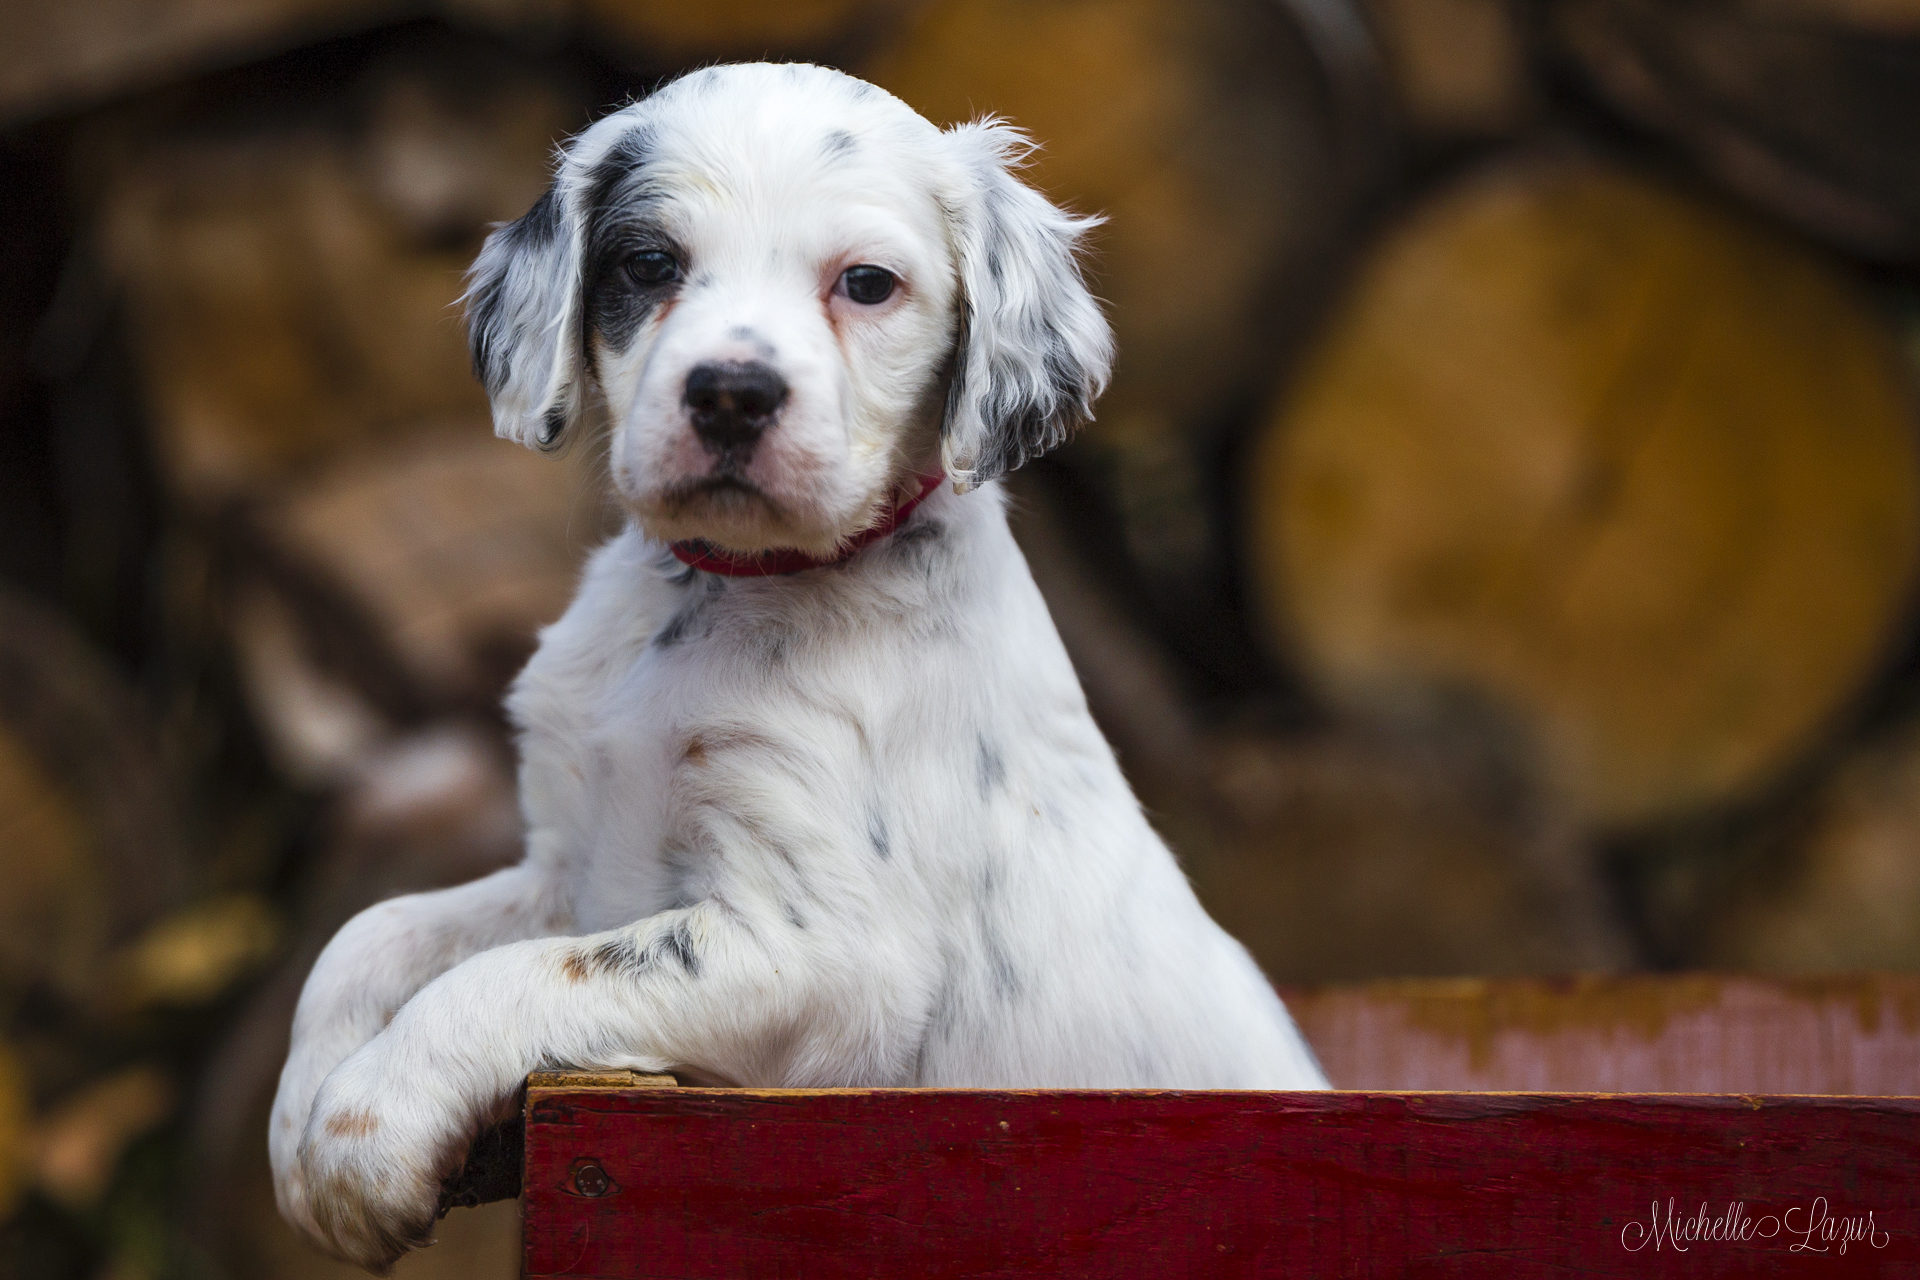 Storm, tri-color-male-llewellin setter puppy 20151019-_MG_4252